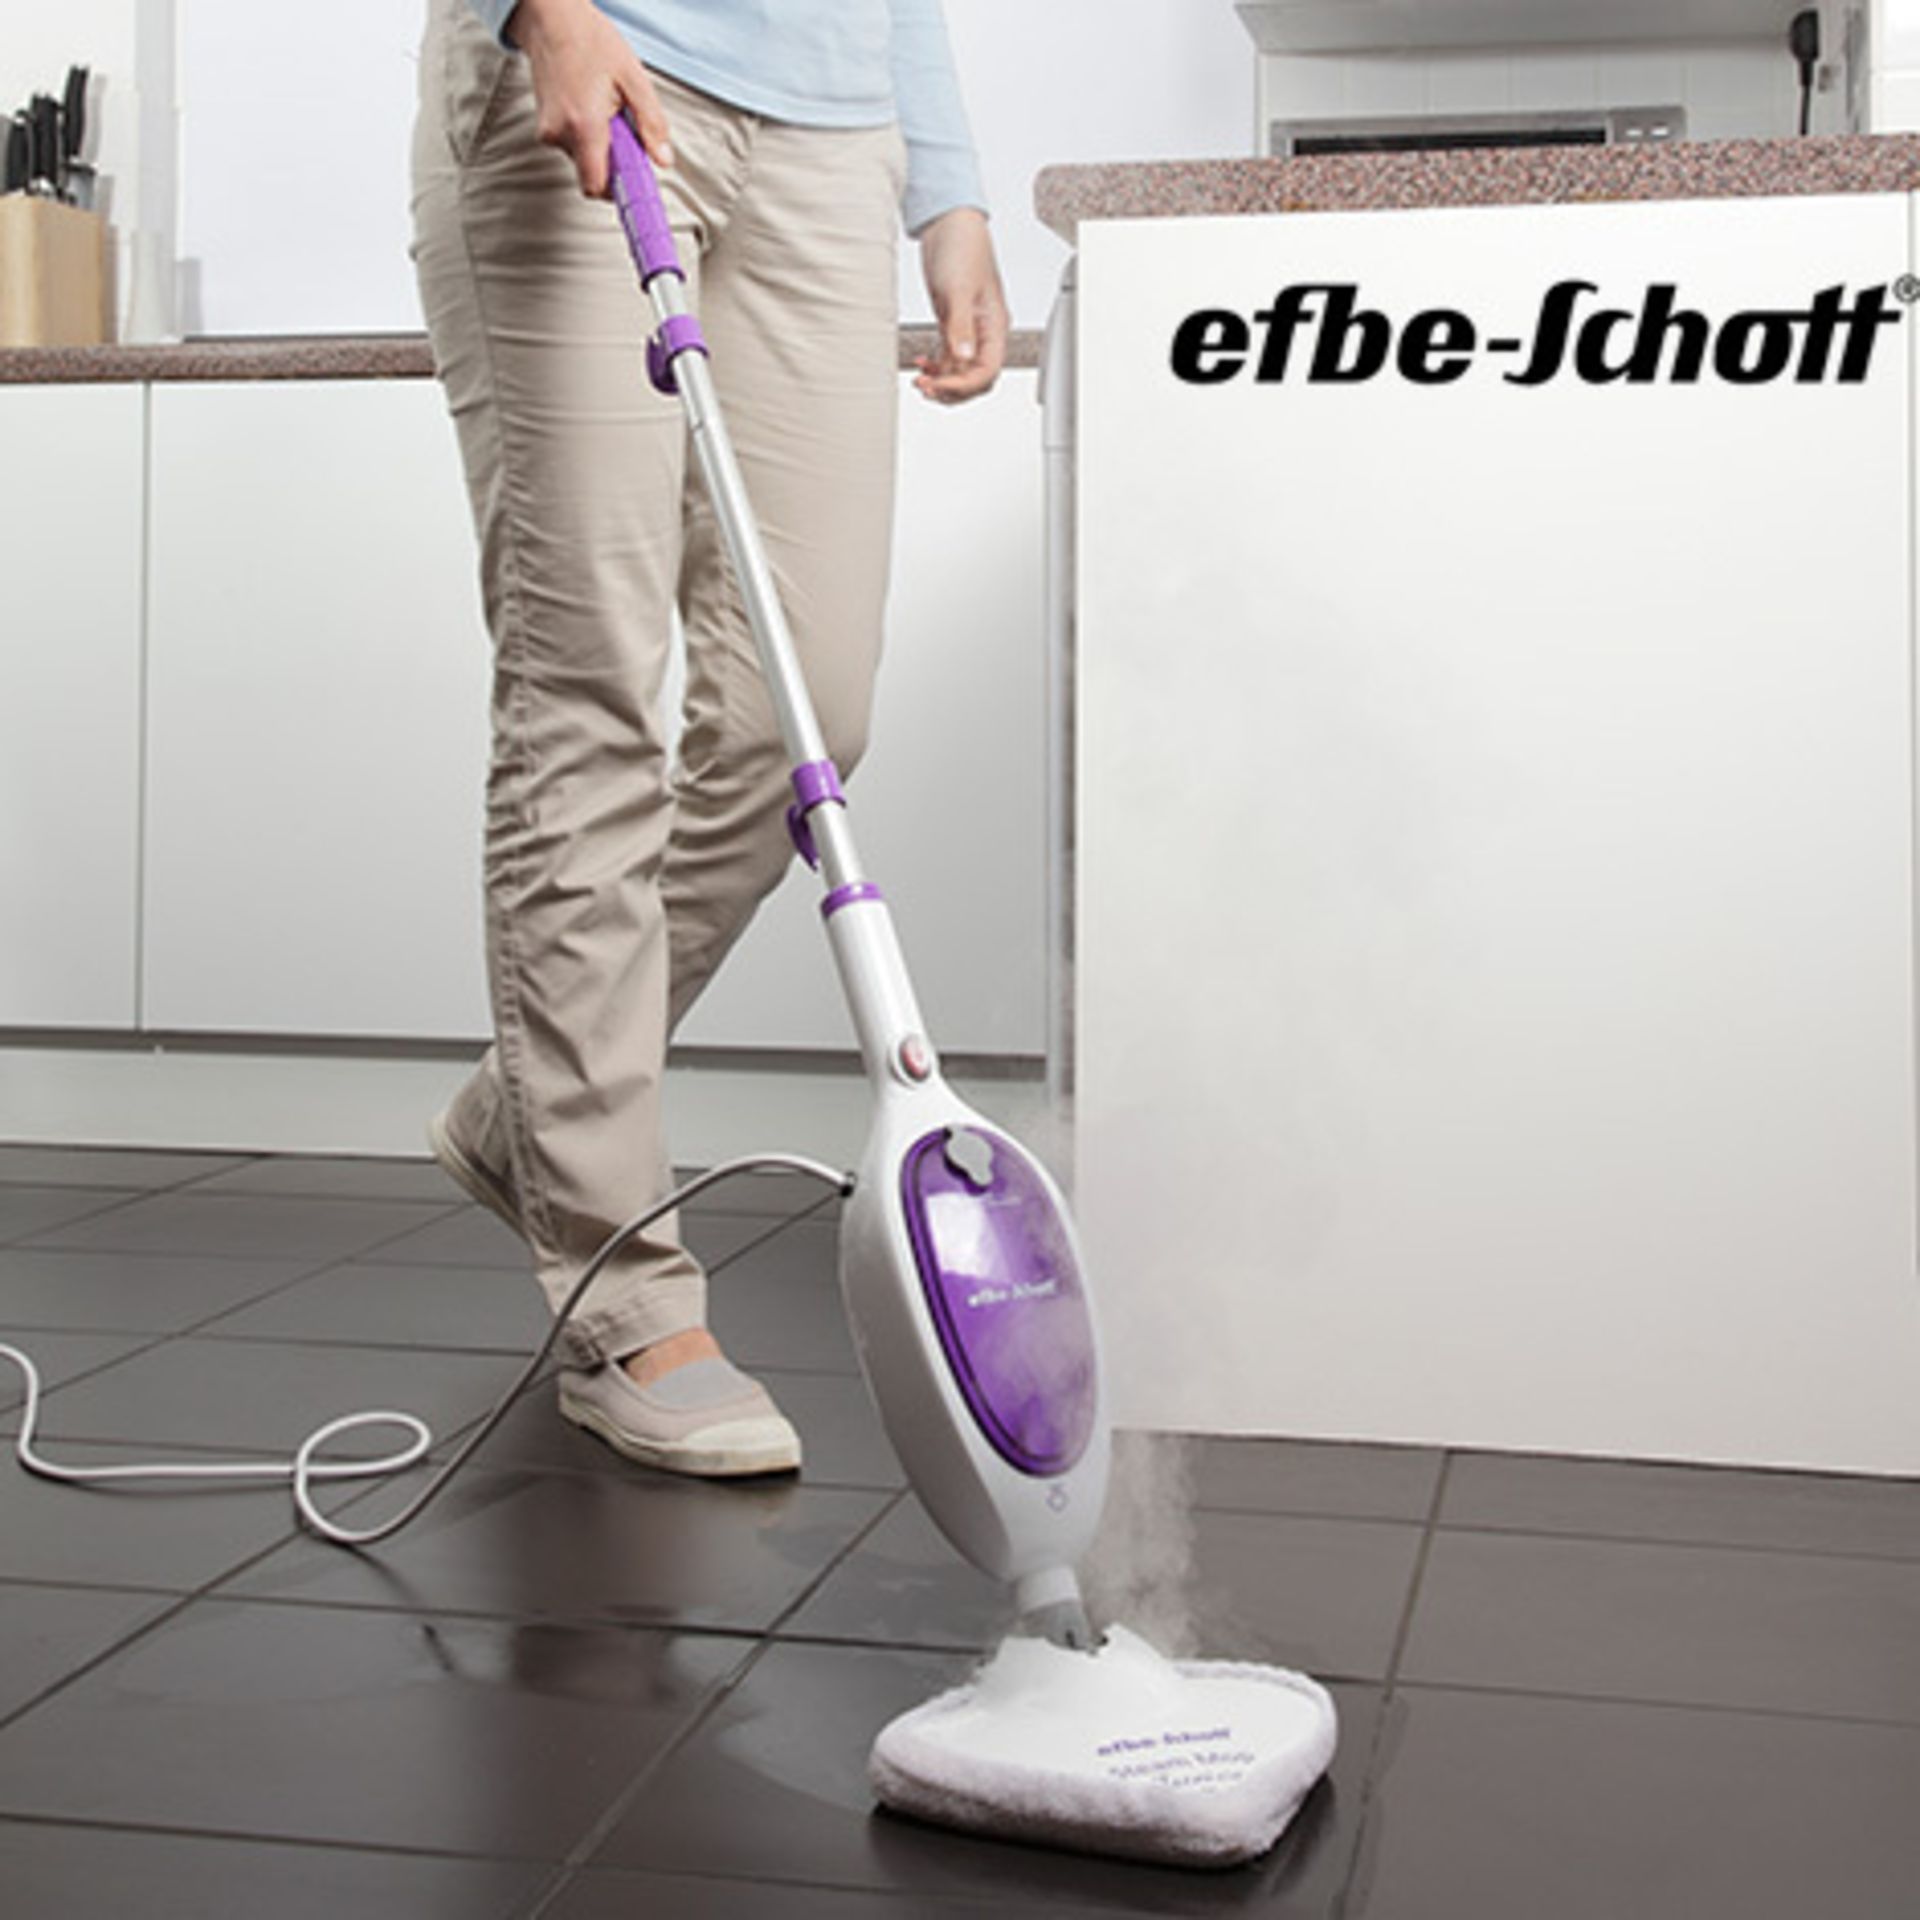 V Brand New Efbe-Schott Steam Mop (New And Boxed) Colours And Model May Vary RRP59.99